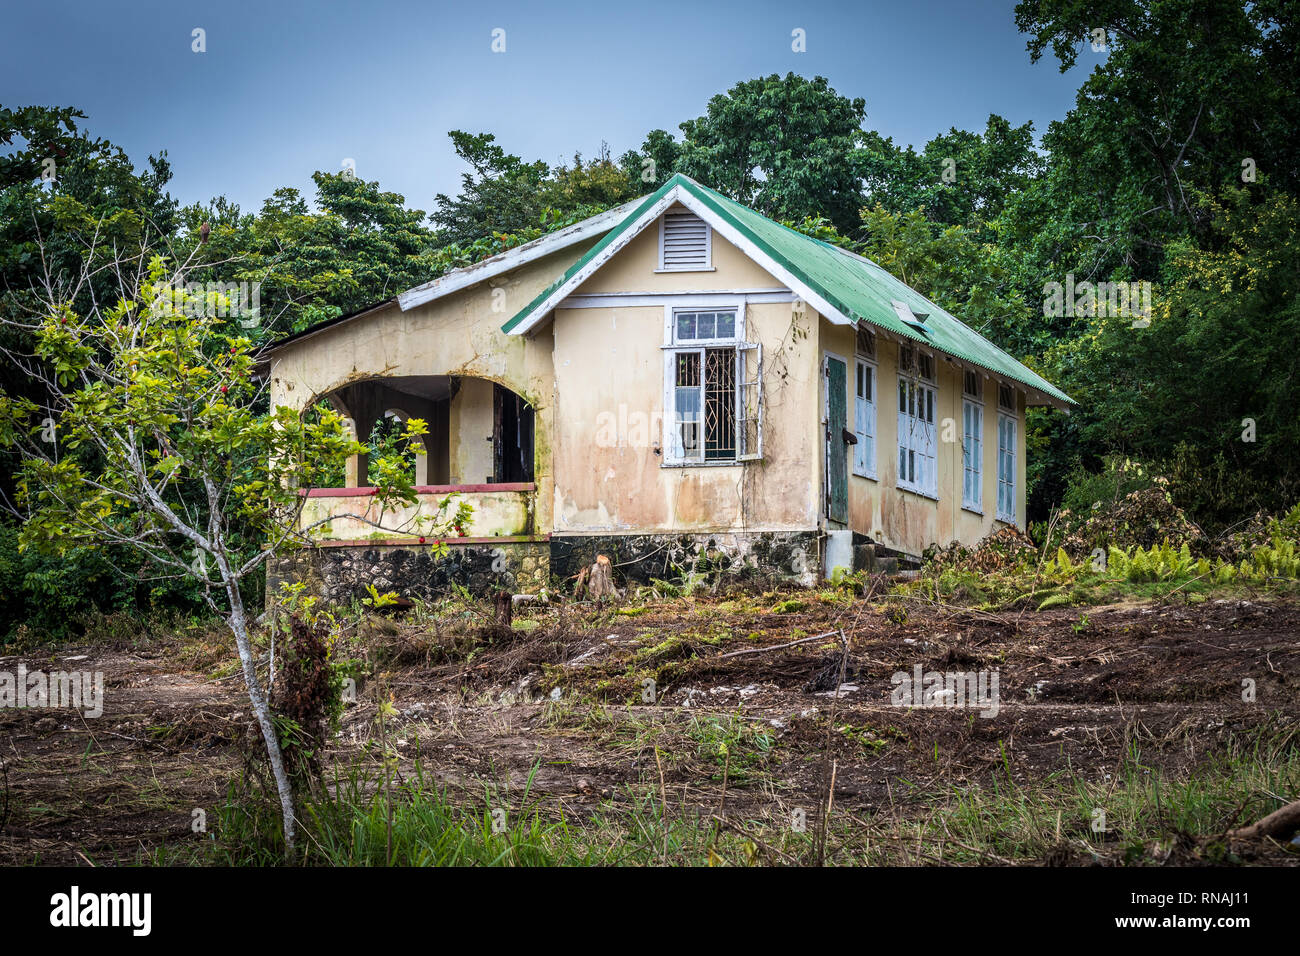 Abandoned old house with an ackee fruit tree in front, in Caribbean countryside Stock Photo